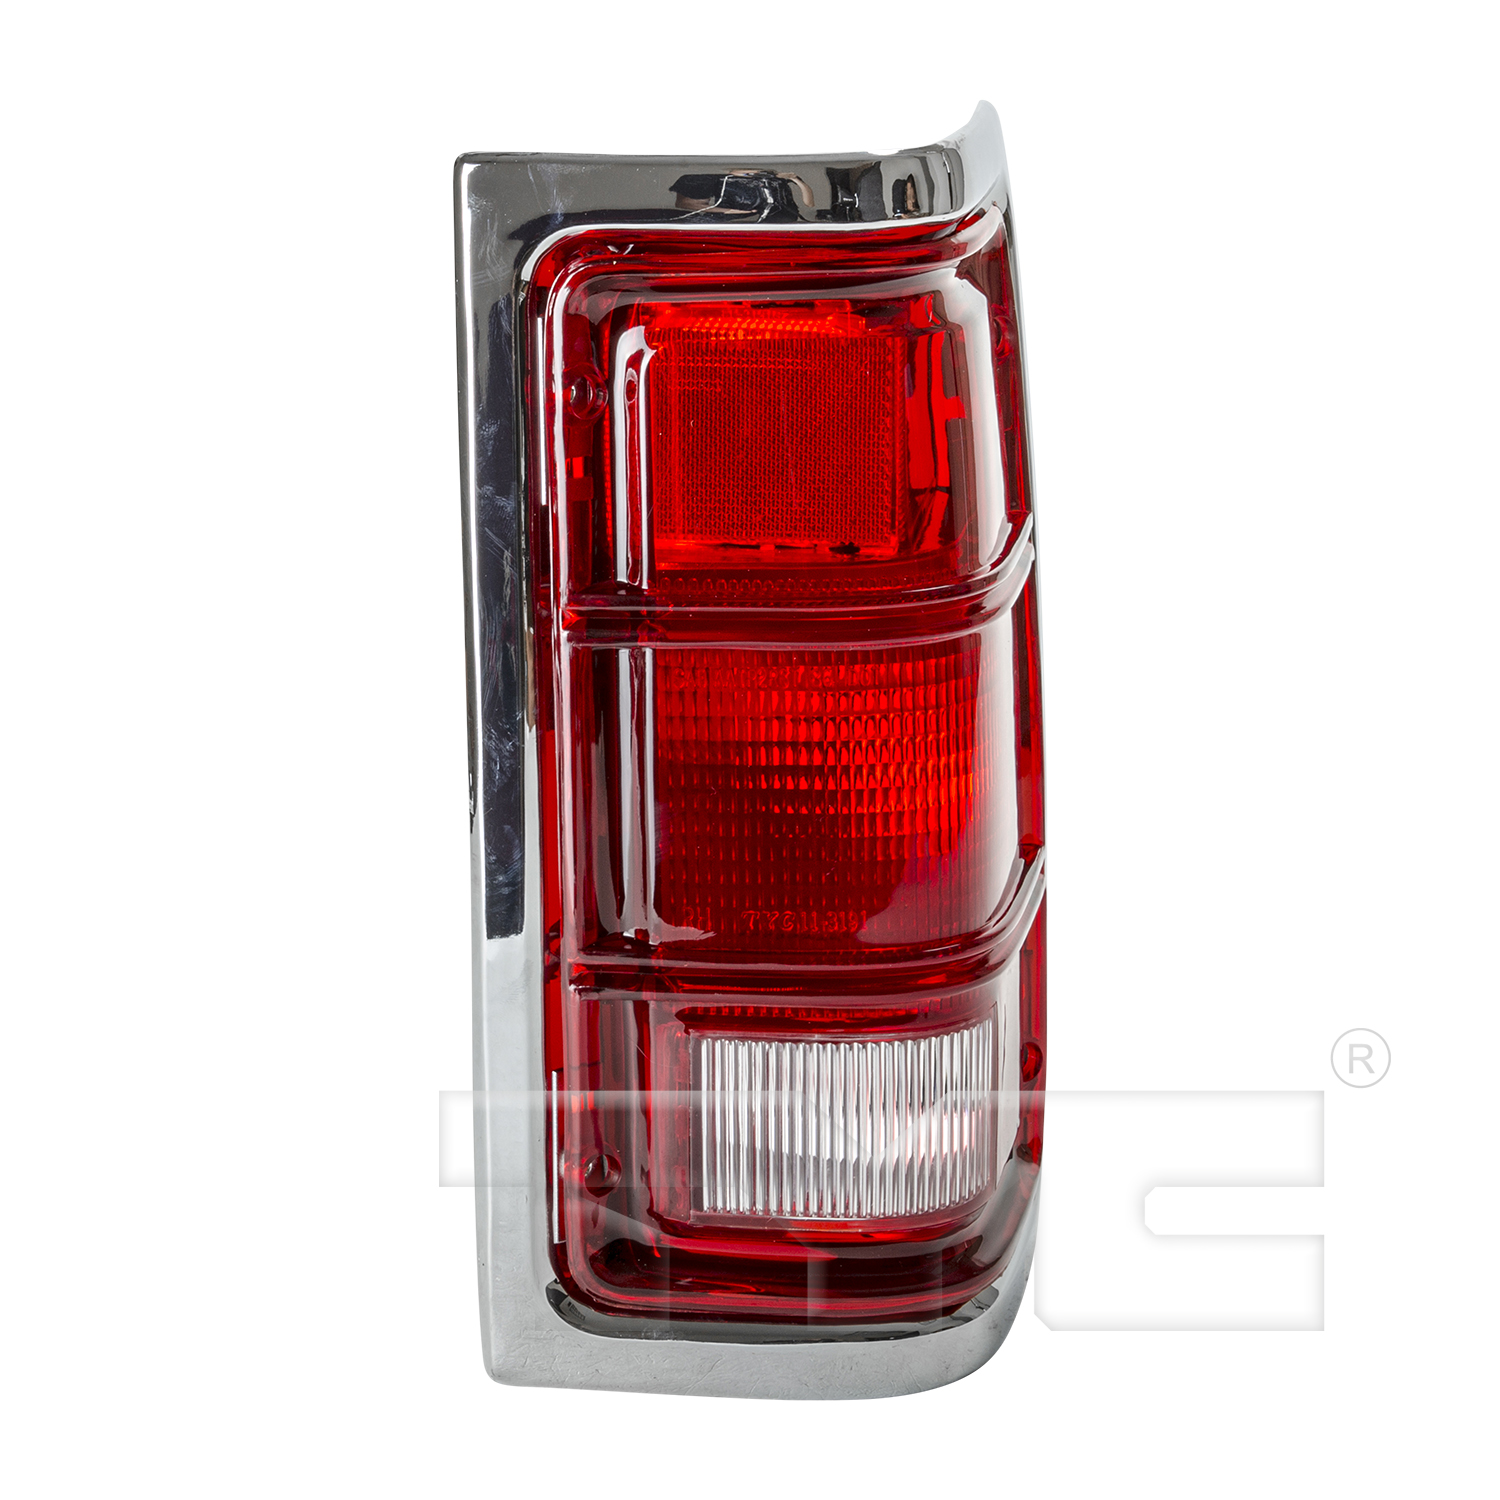 Aftermarket TAILLIGHTS for DODGE - W250, W250,92-93,RT Taillamp lens